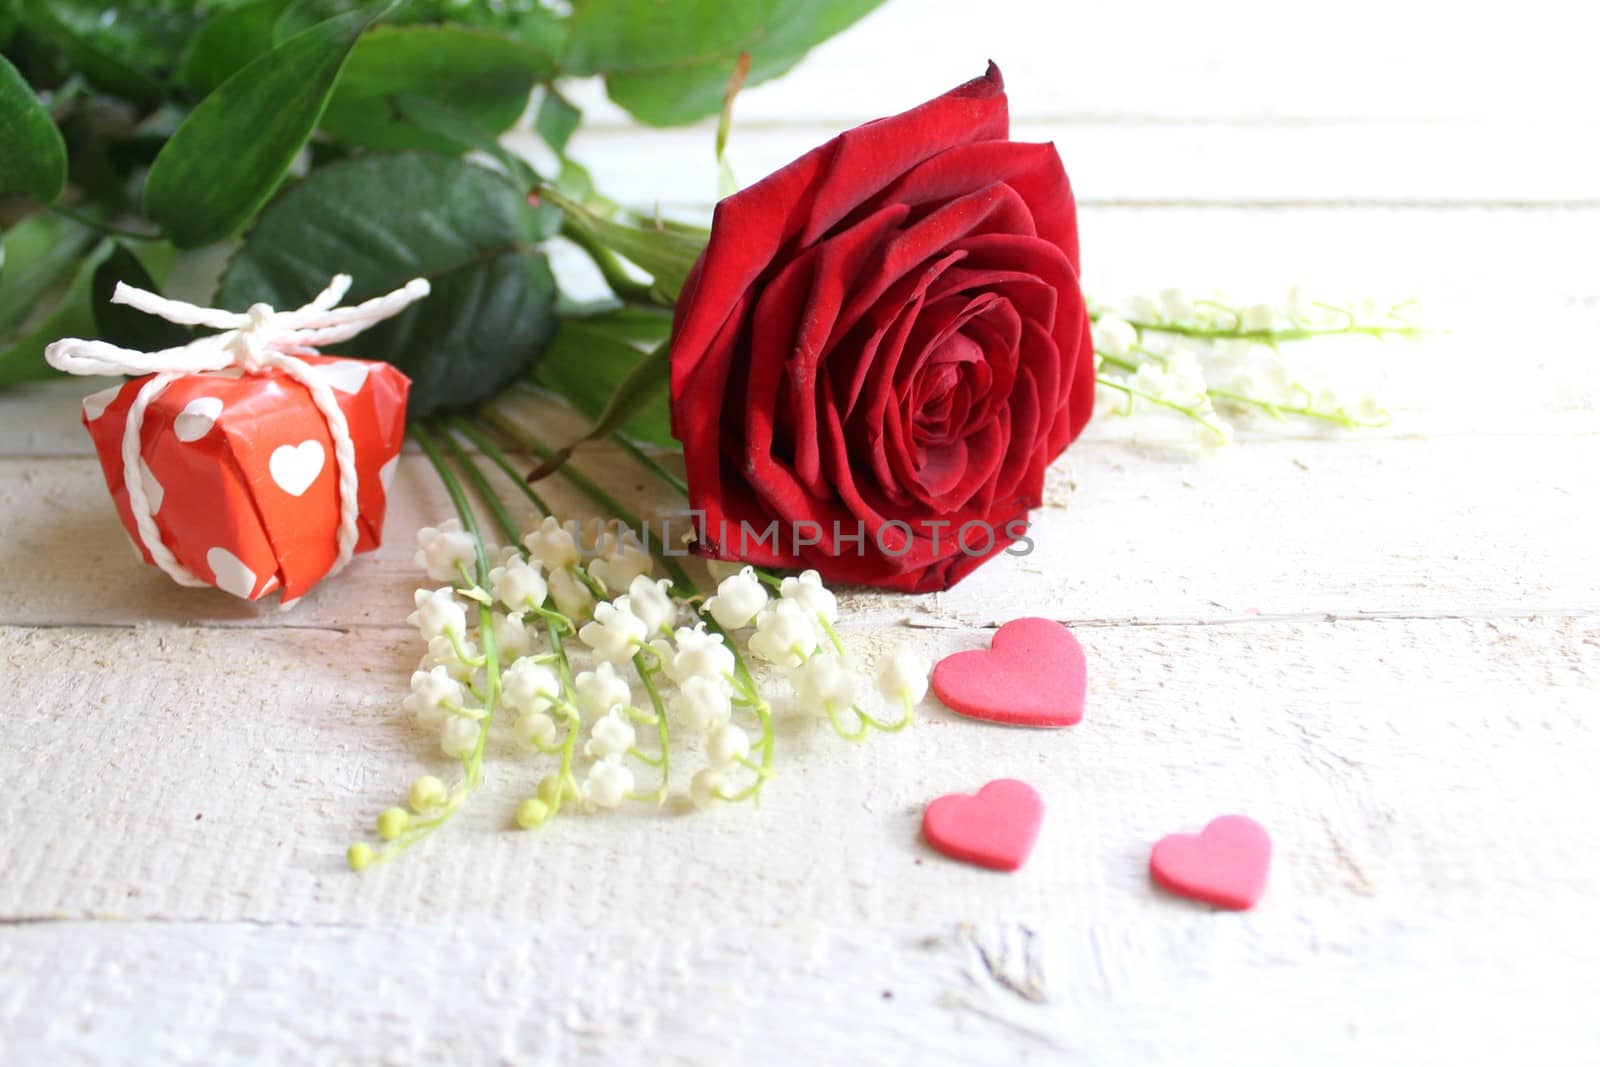 The picture shows flower greetings with hearts and a gift.